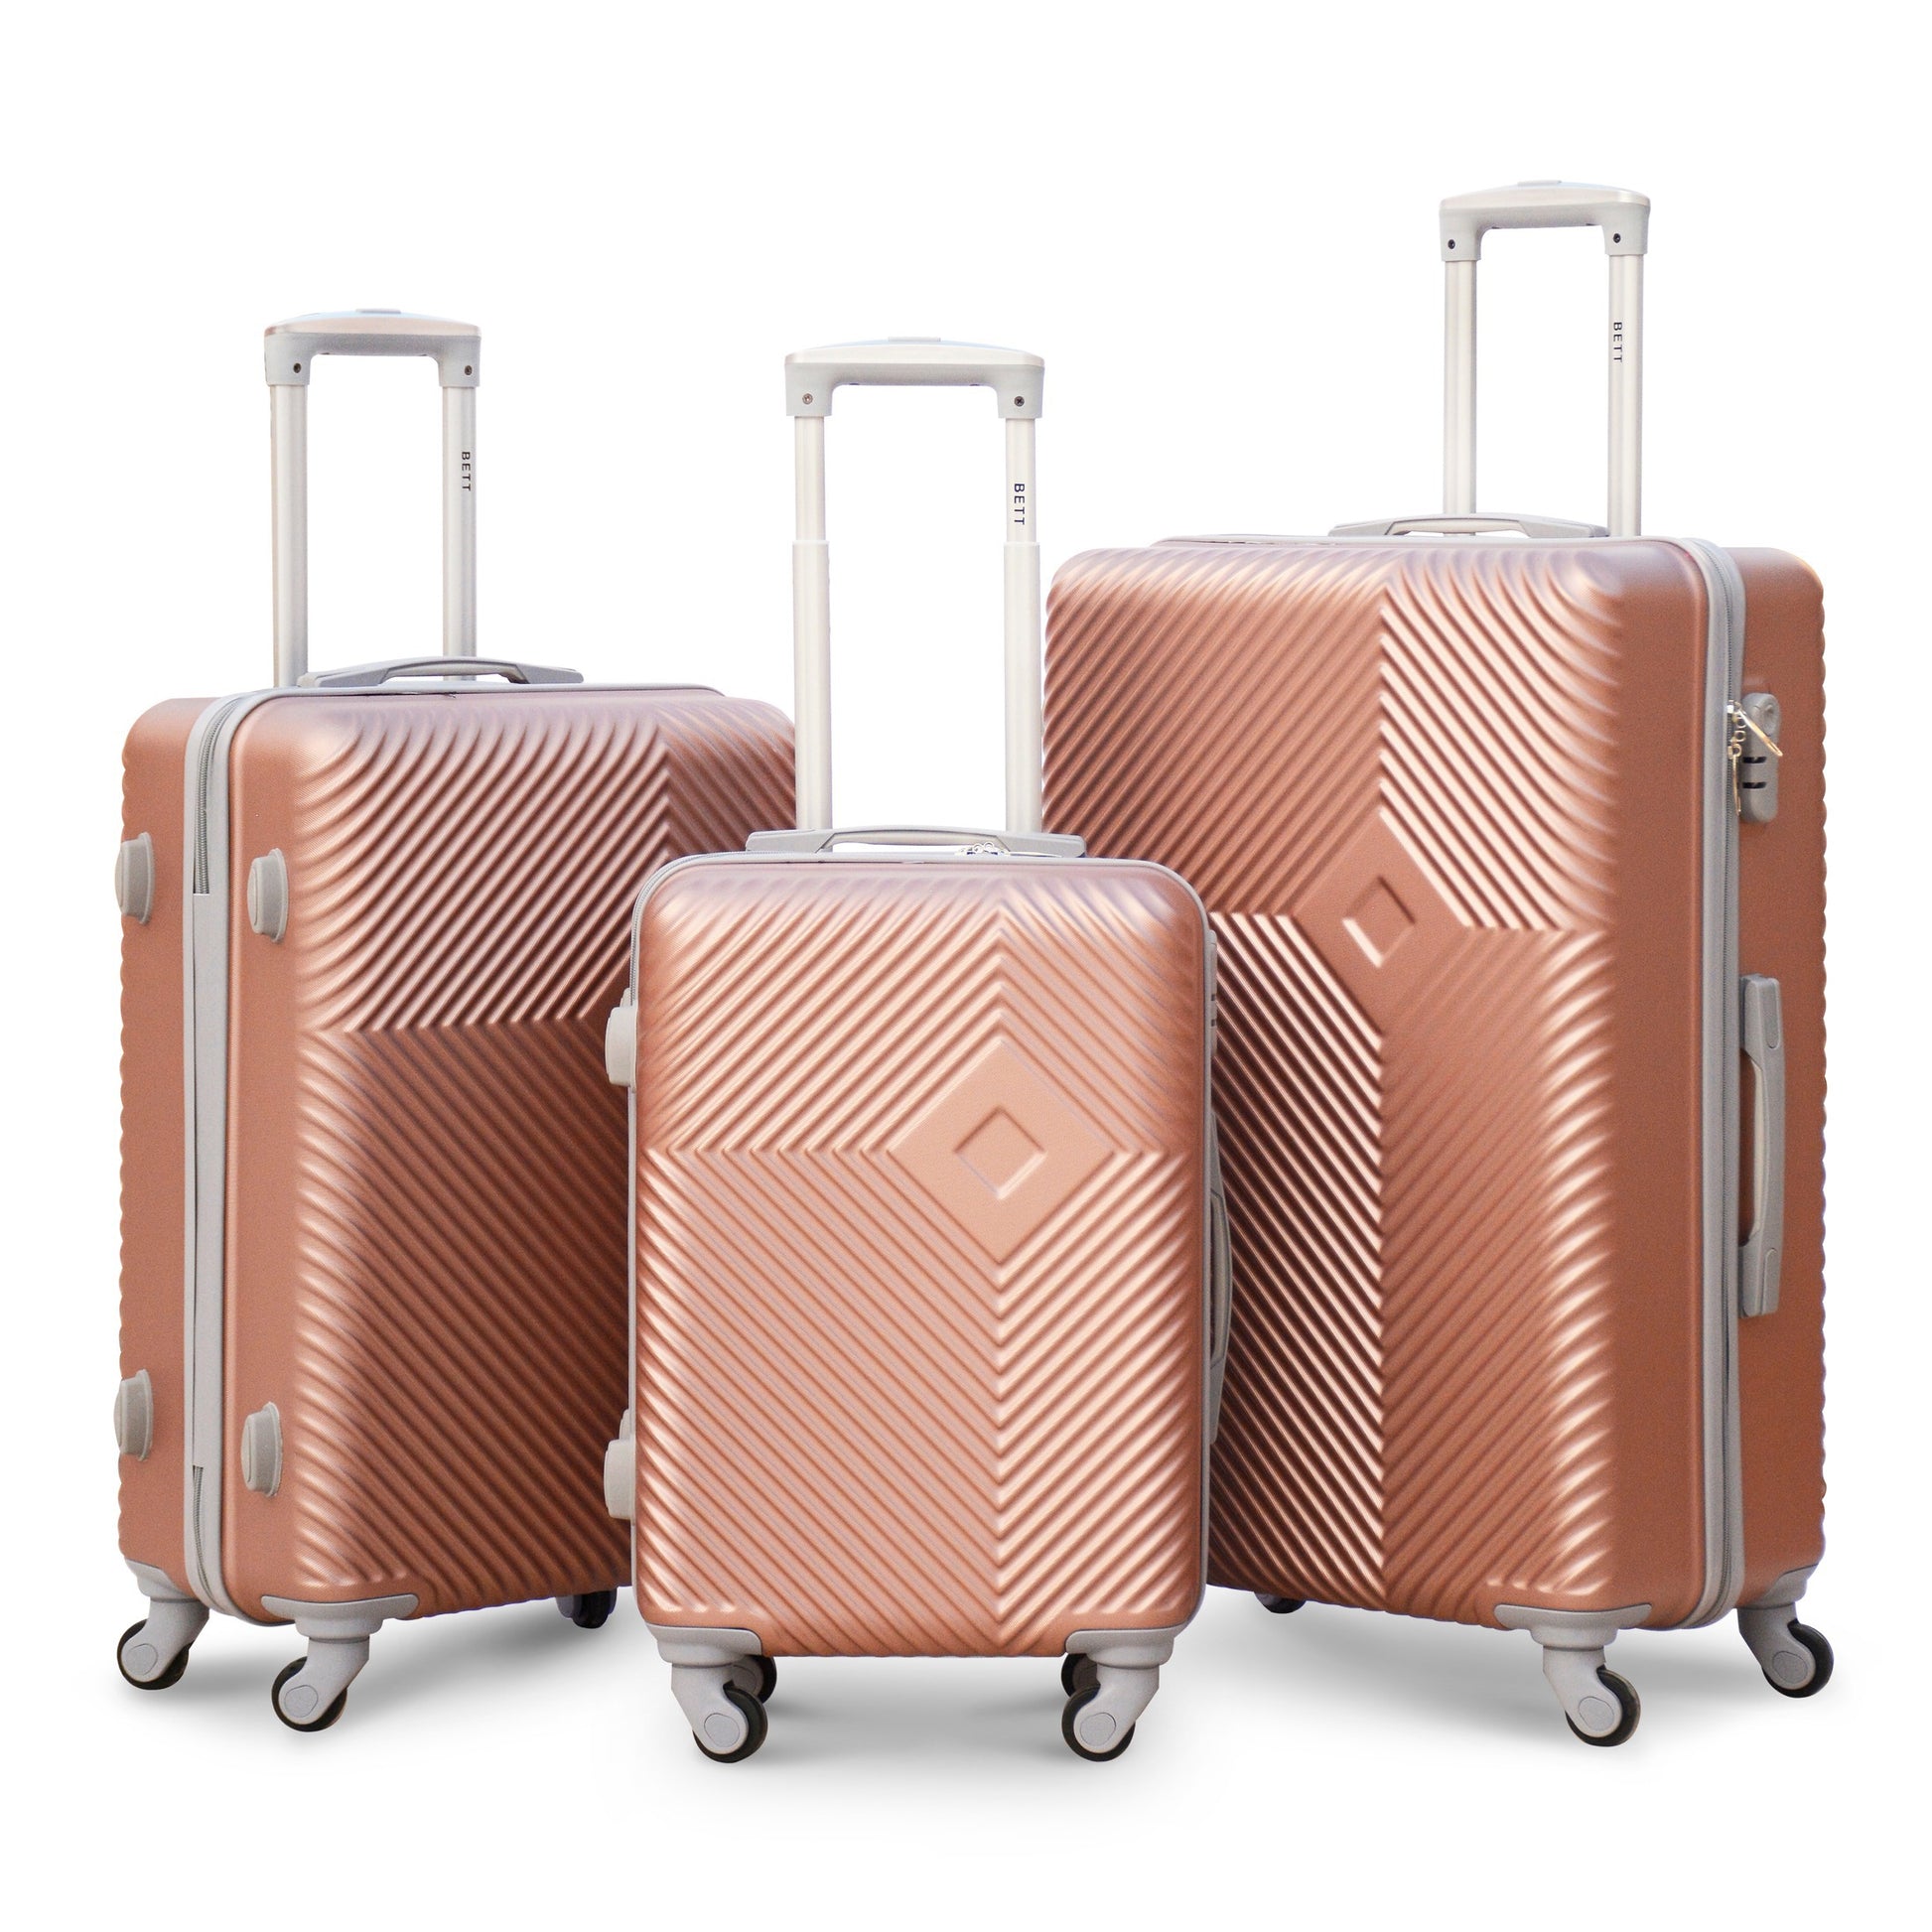 3 Pcs Full Set SI ABS Rose Gold Colour Lightweight Hard Case Luggage 20" 24" 28 Inch zaappy uAe